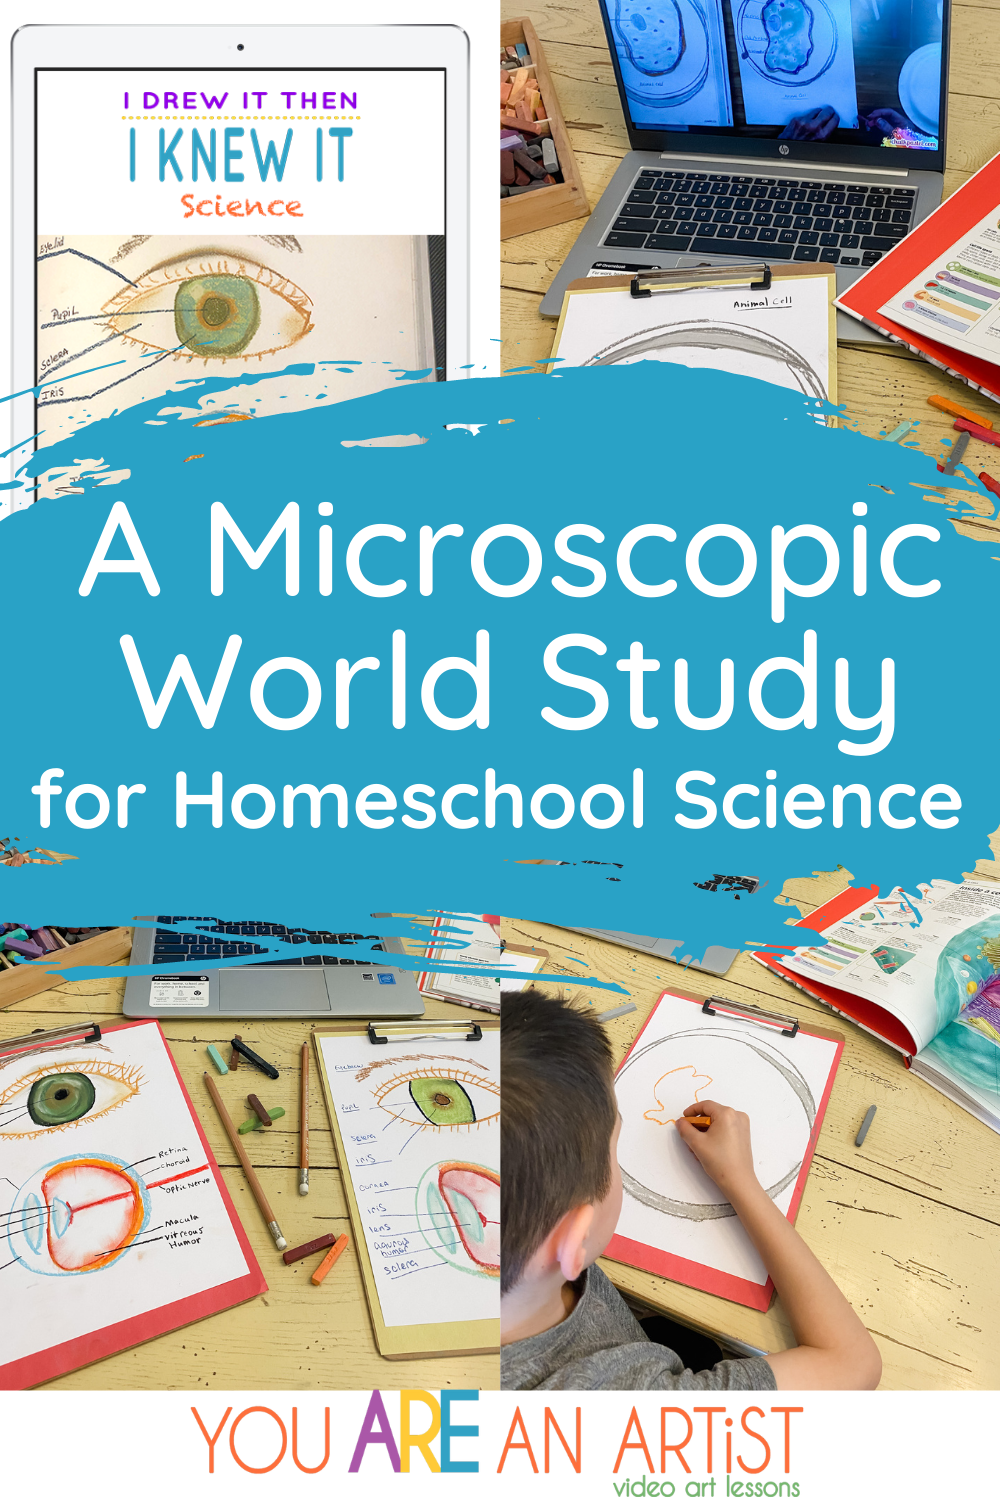 An excellent way to get your children excited about science can be through exploring the microscopic world. #homeschoolscience #microscopicstudy #sciencecurriculum #sciencestudy 